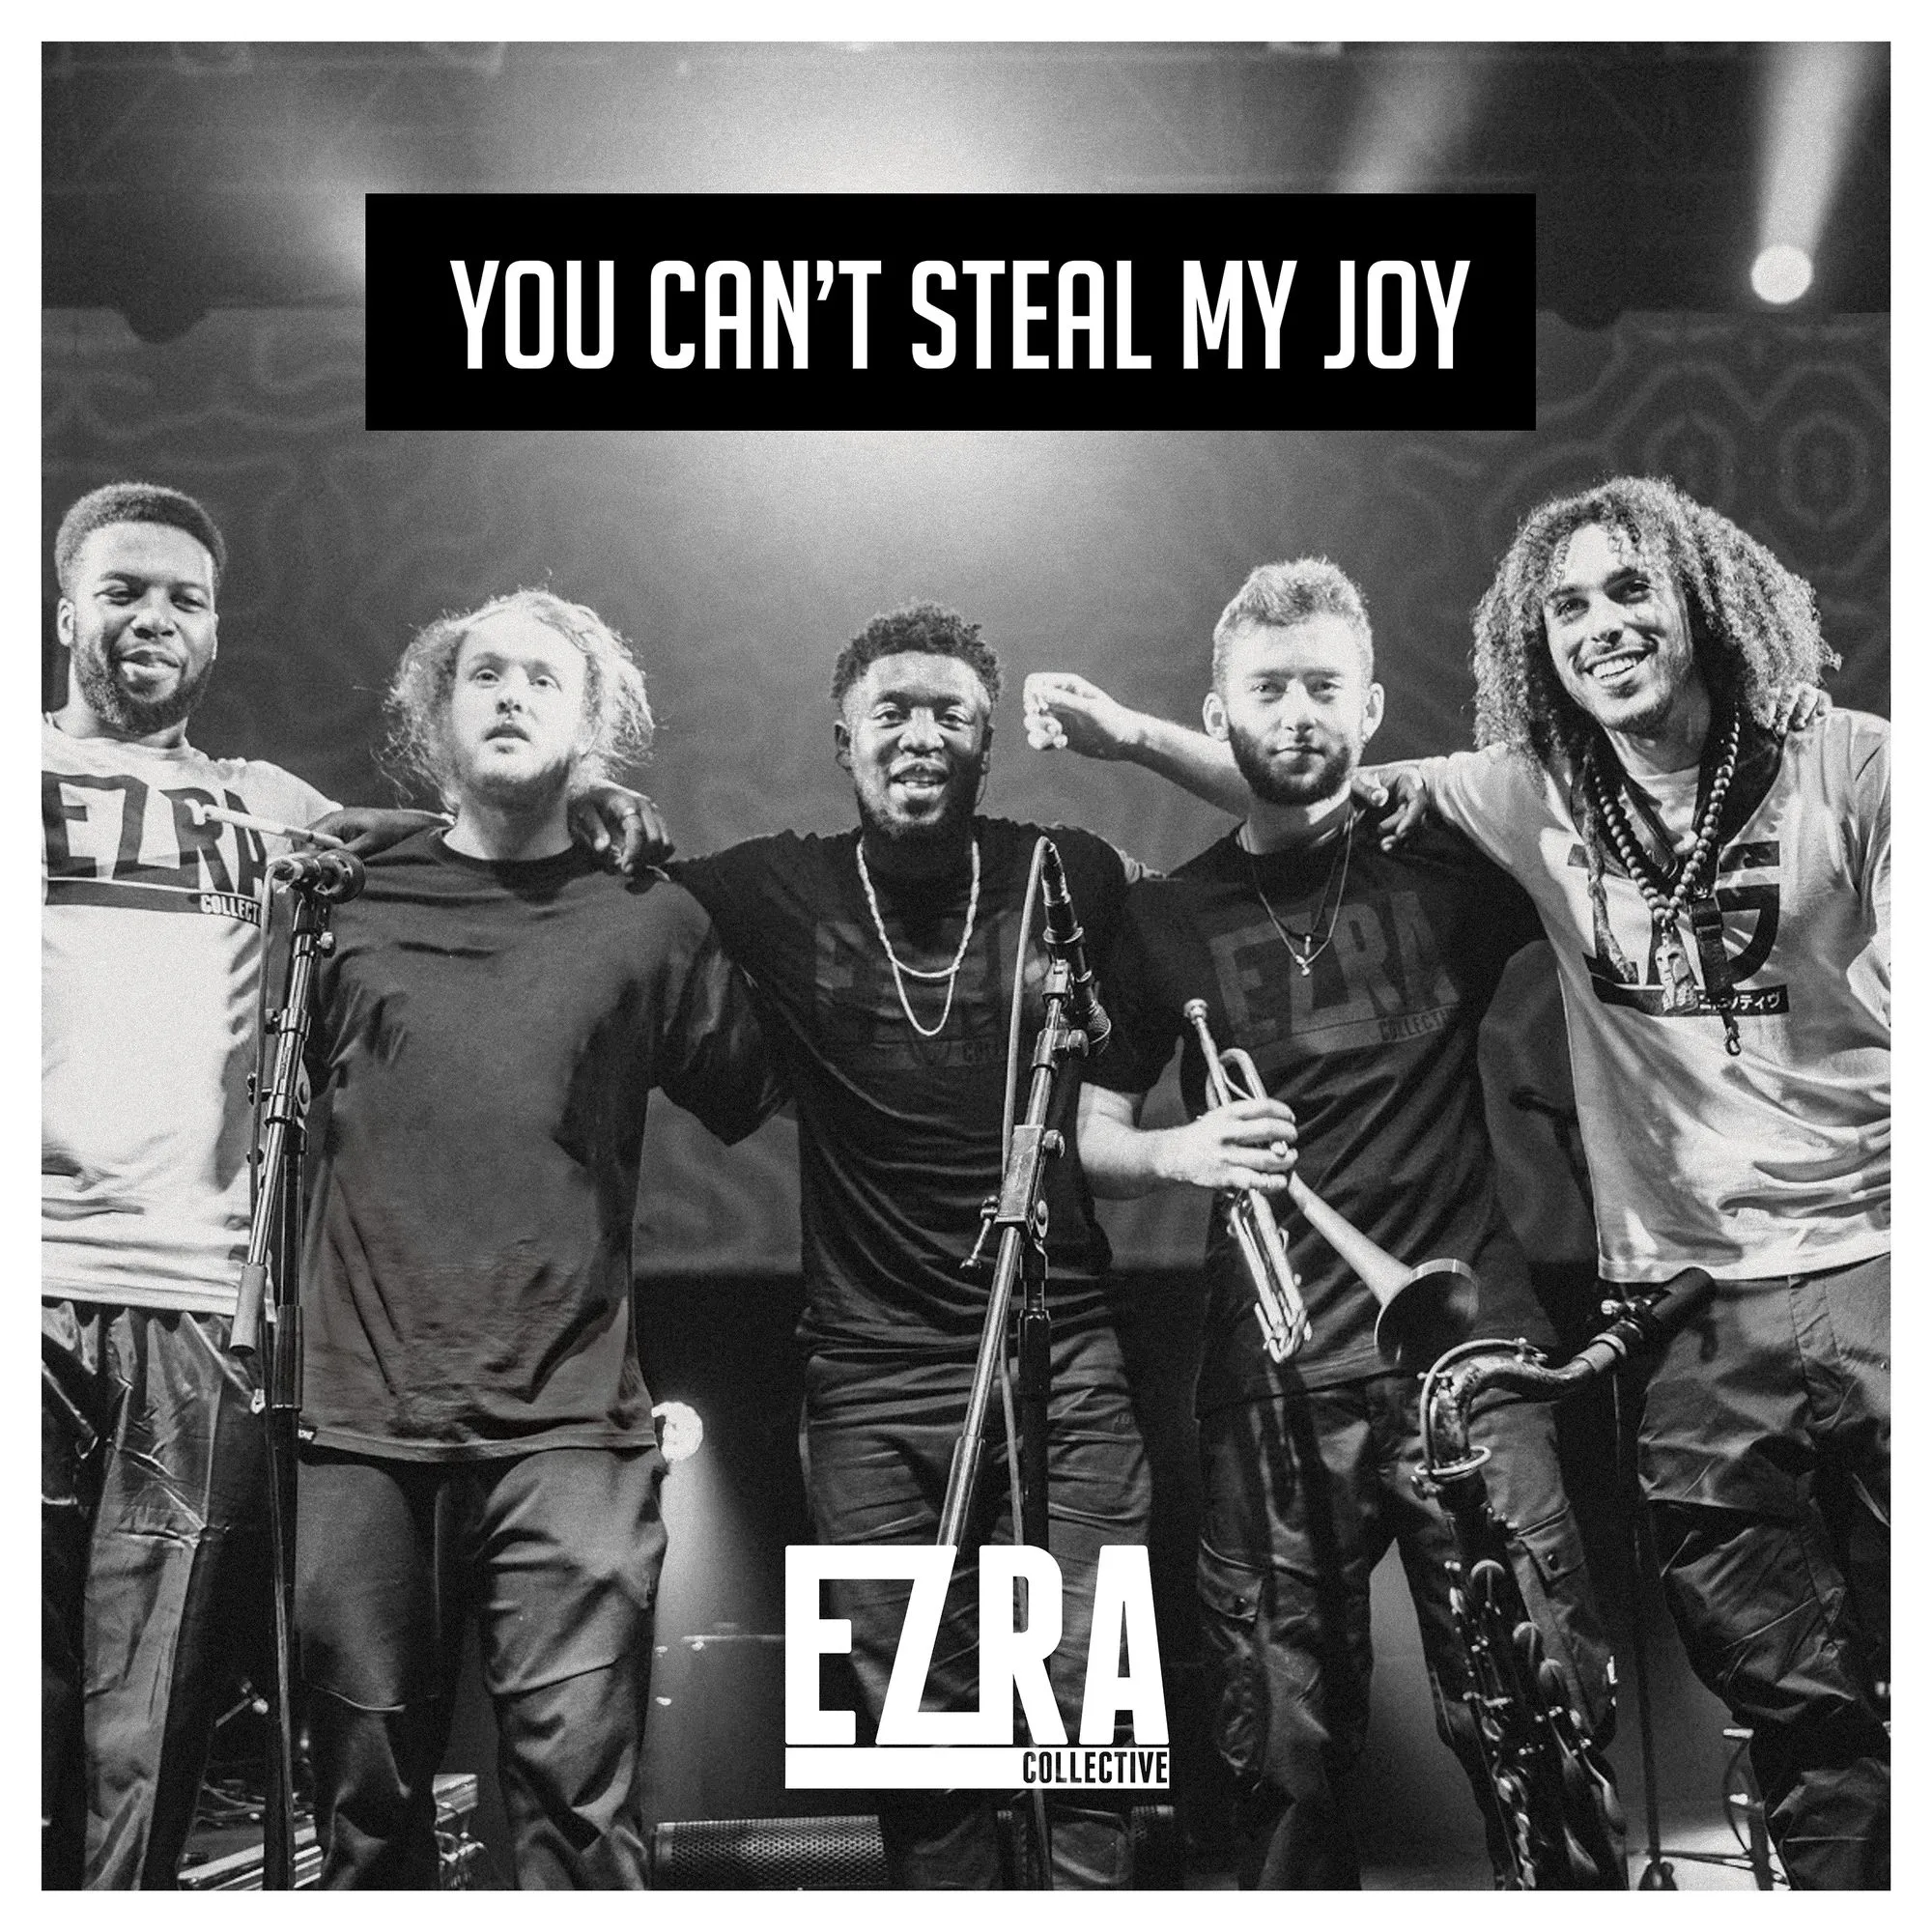 <strong>Ezra Collective - You Can't Steal My Joy</strong> (Vinyl LP - black)